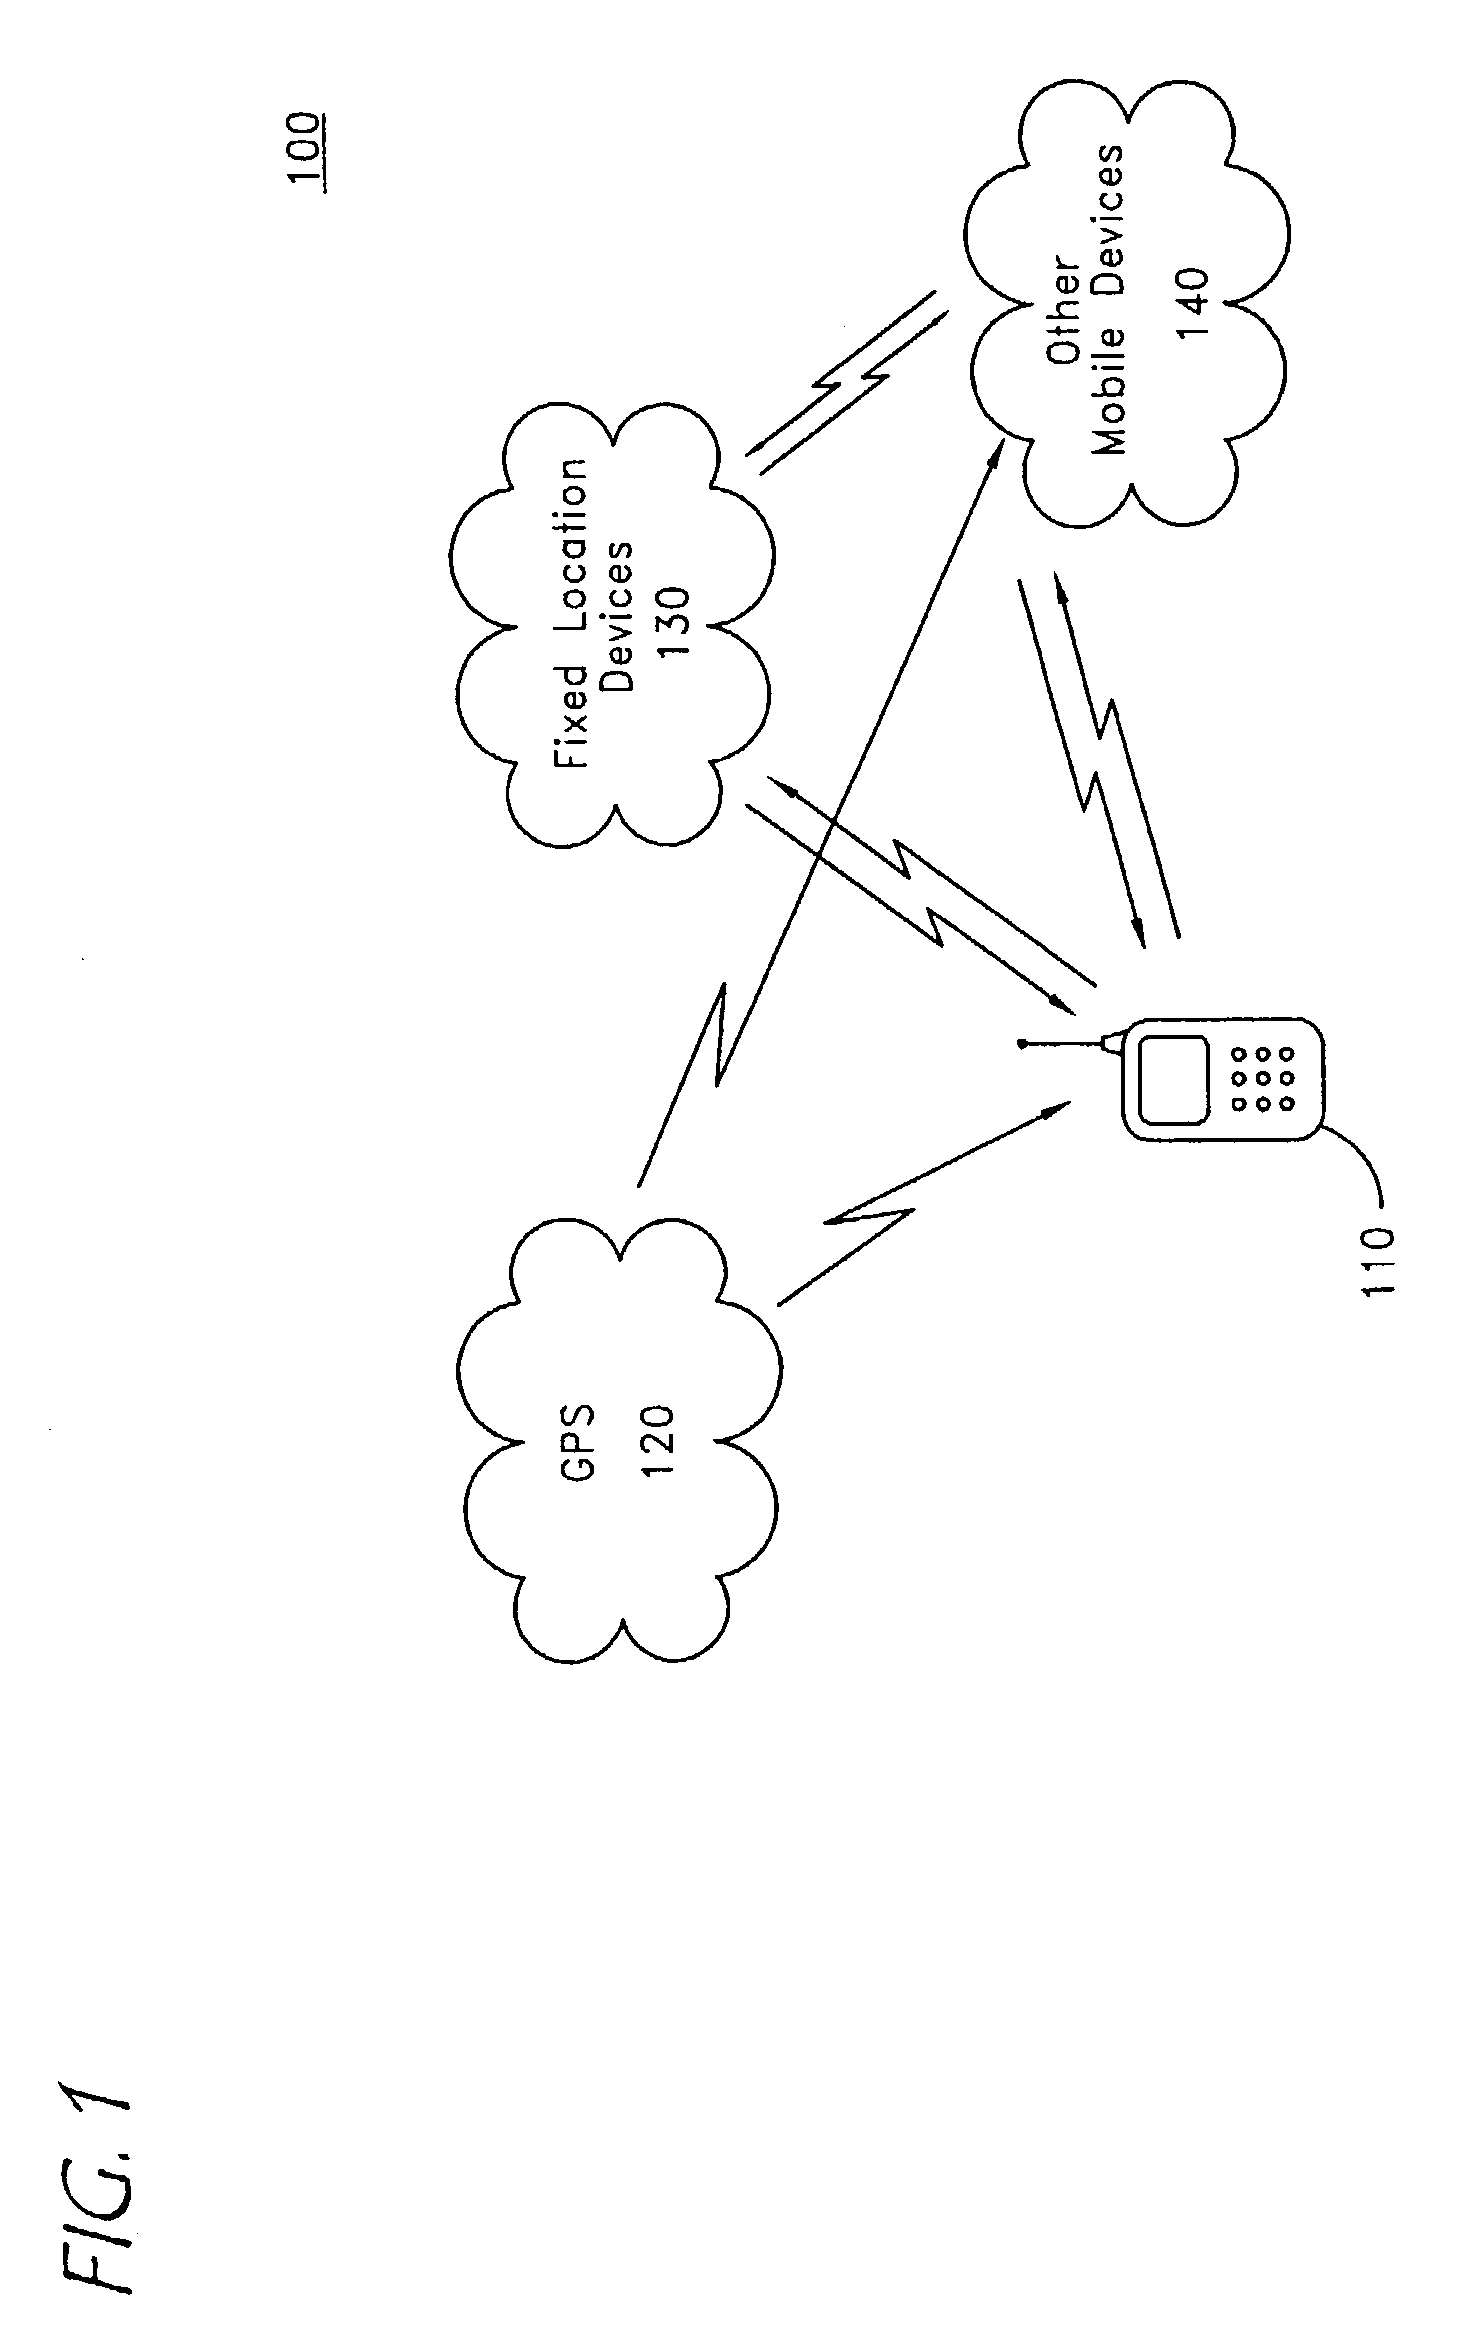 Apparatus and method of position determination using shared information